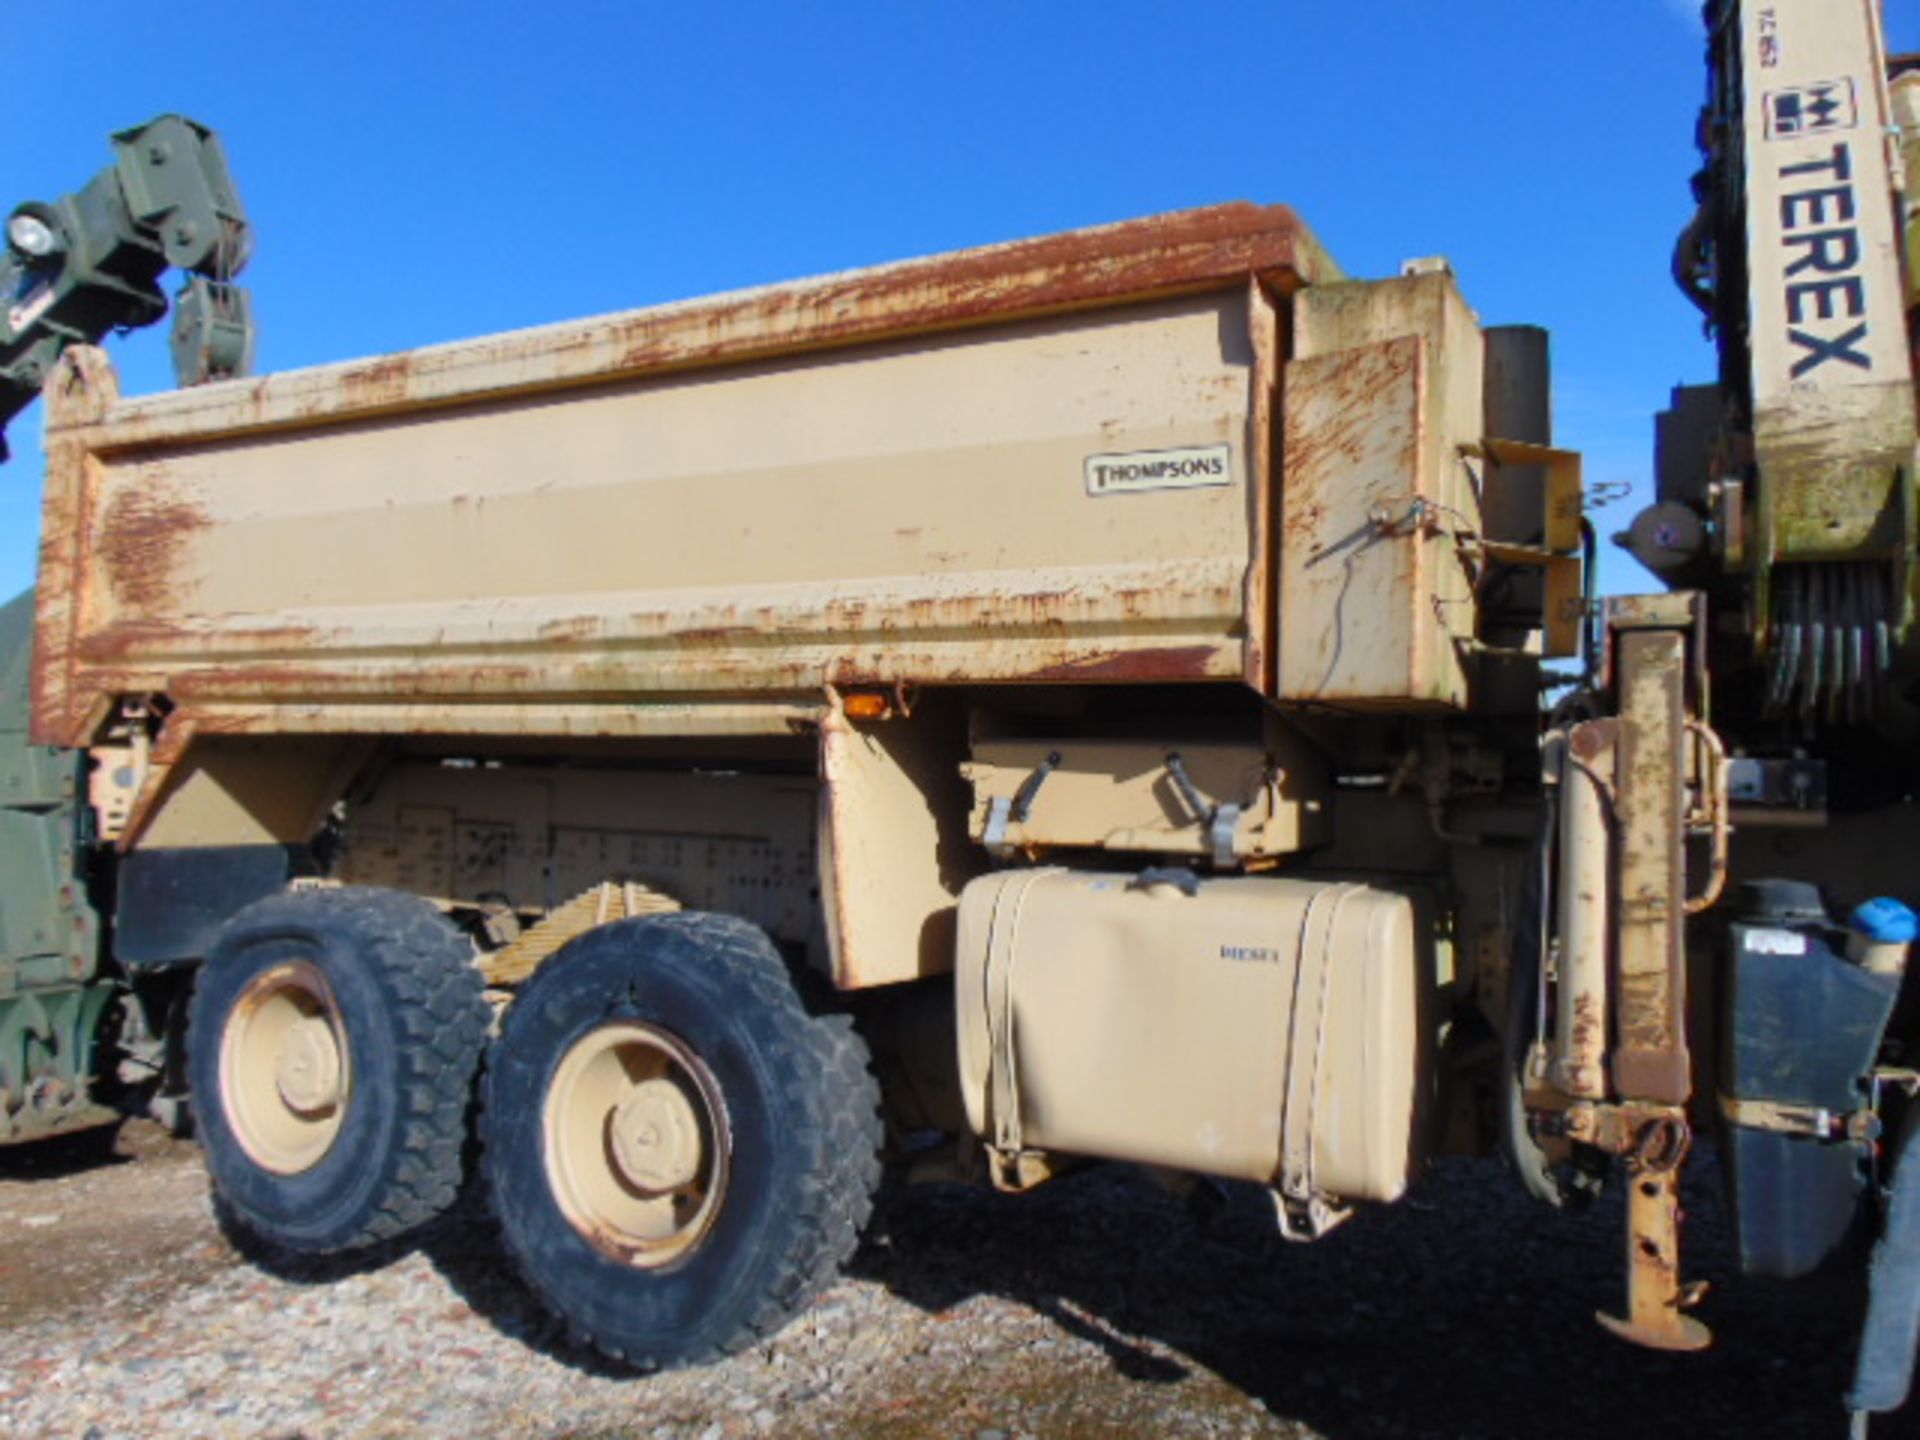 Damage Repairable LHD Iveco Trakker 8x8 Self Loading Dump Truck (Protected) - Image 11 of 15